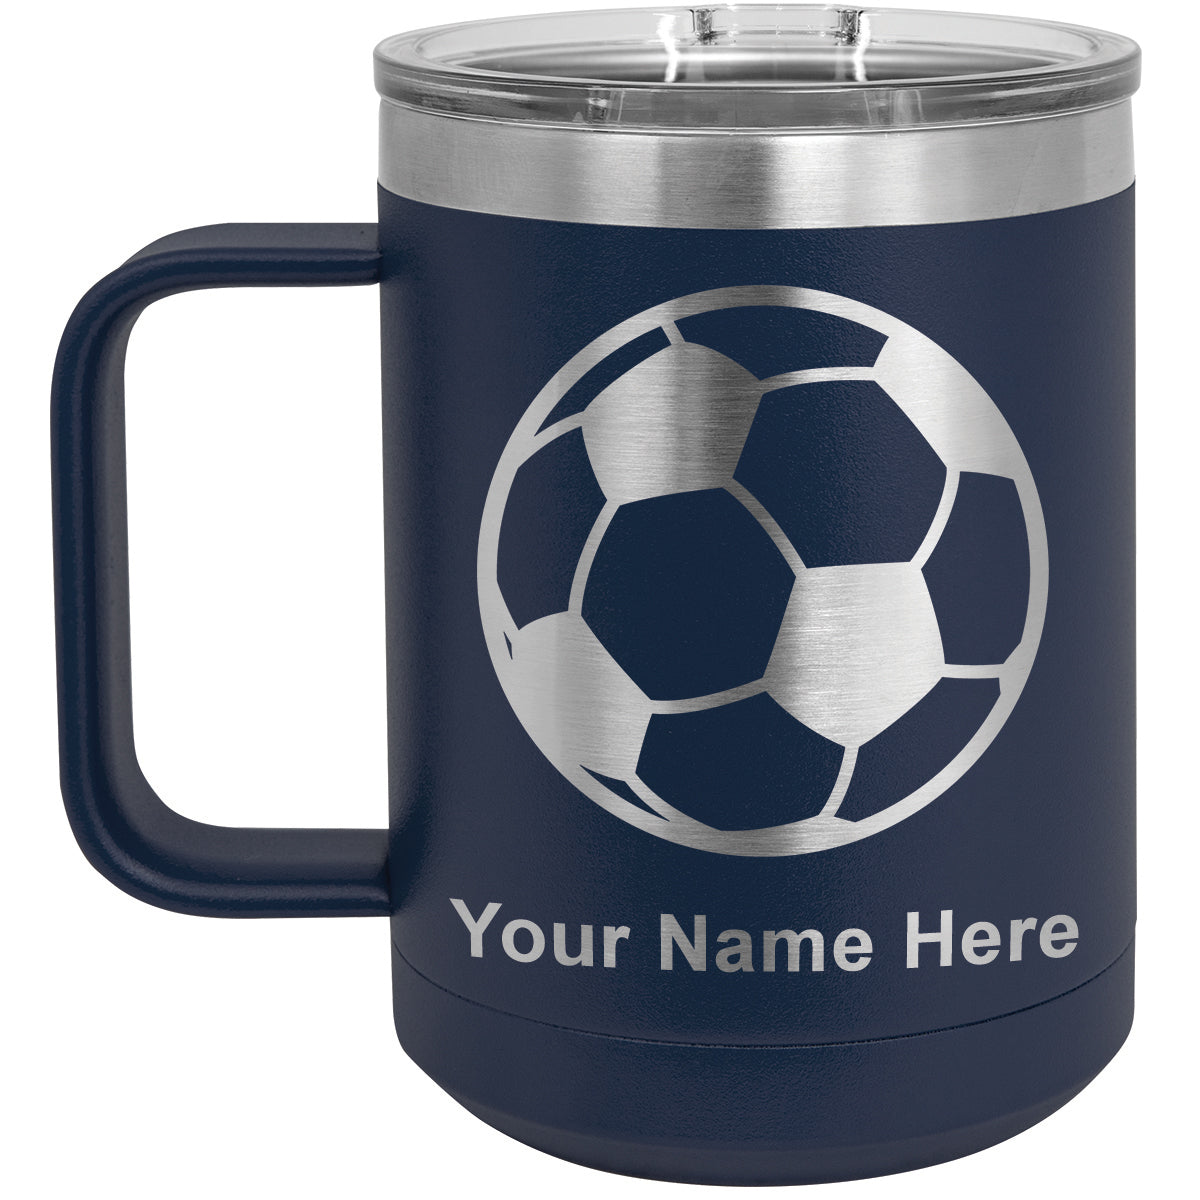 15oz Vacuum Insulated Coffee Mug, Soccer Ball, Personalized Engraving Included